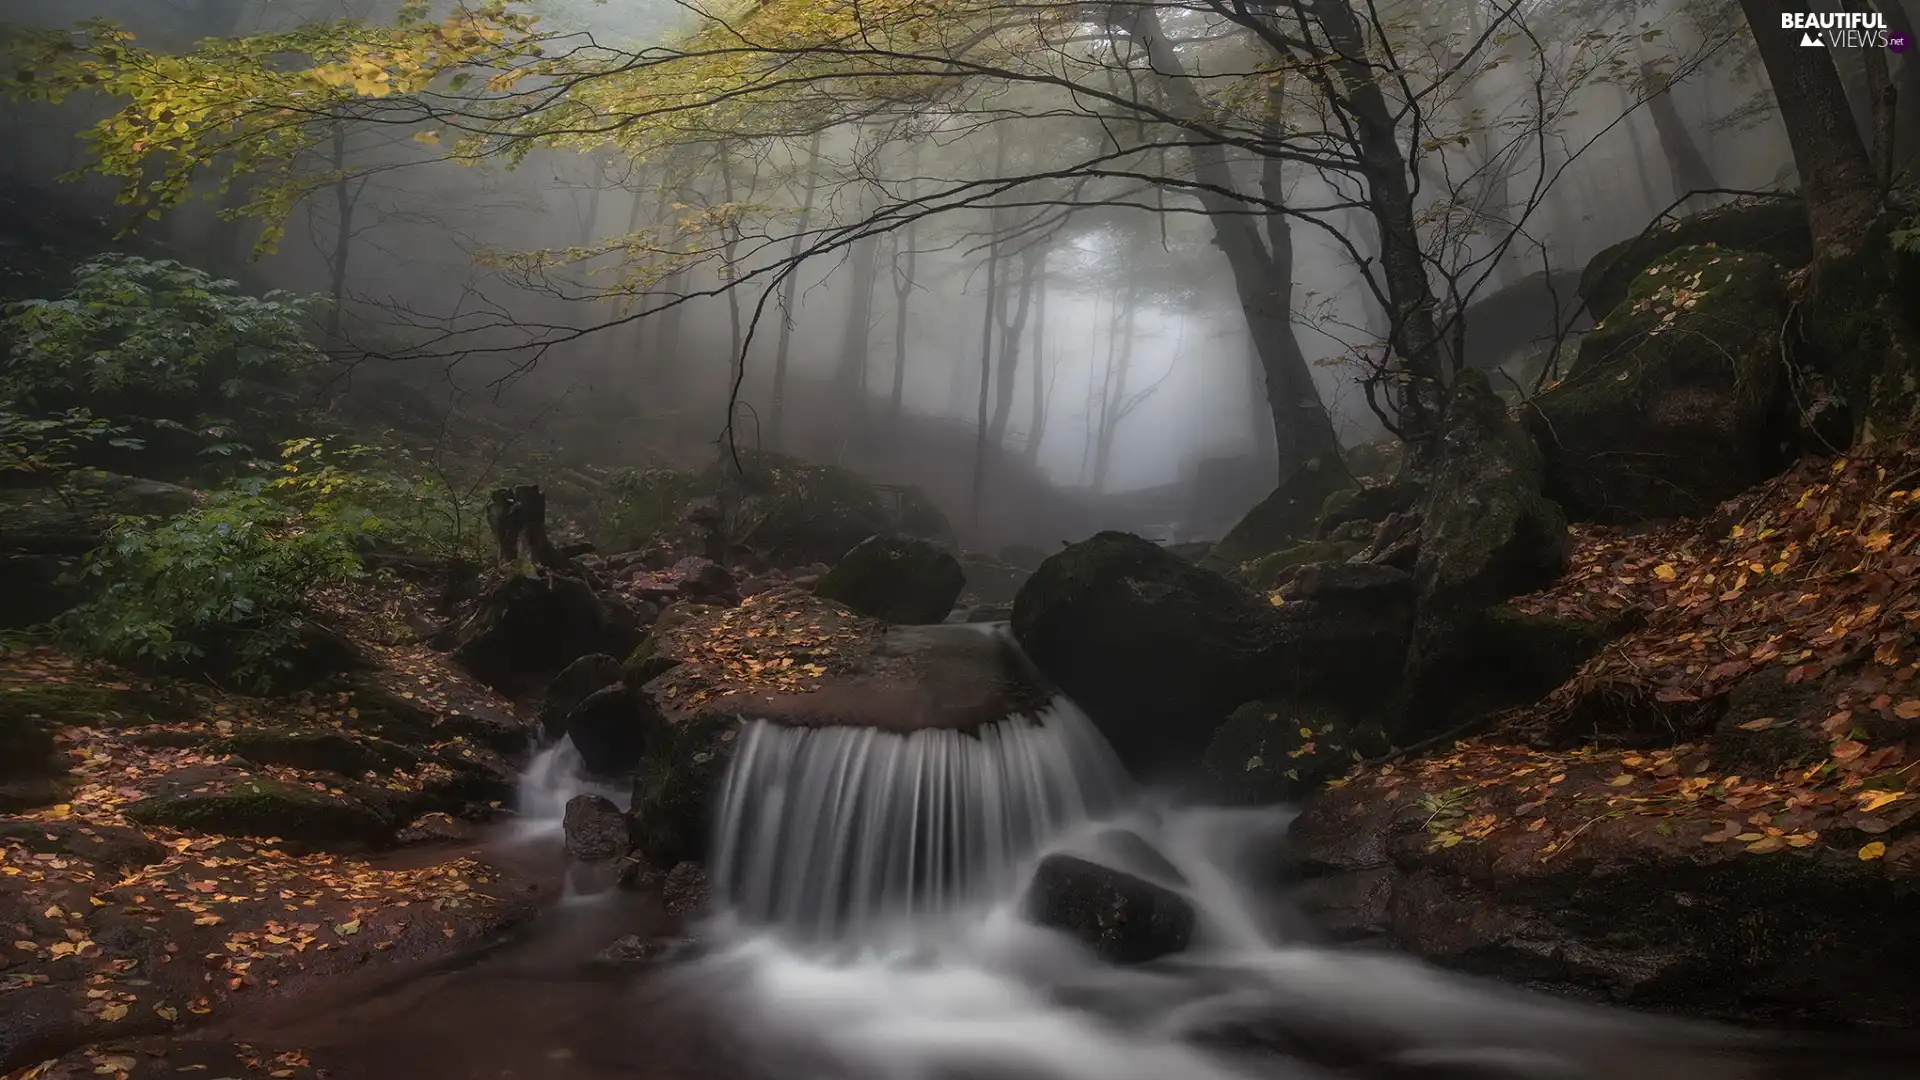 Fog, trees, River, viewes, Stones, forest, autumn, Leaf